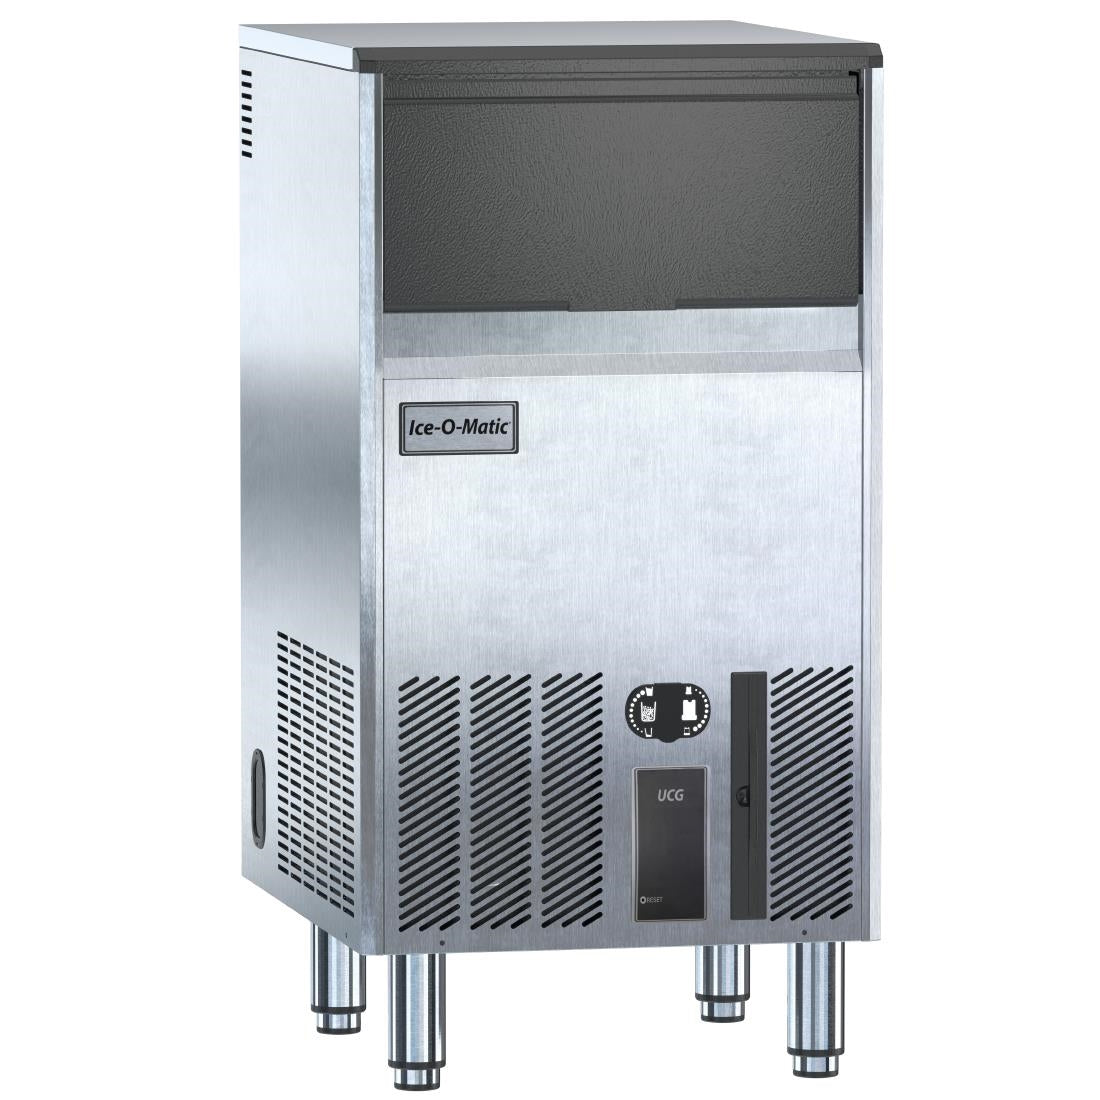 Ice-O-Matic Bistro Cube Ice Machine UCG135A FT644 JD Catering Equipment Solutions Ltd